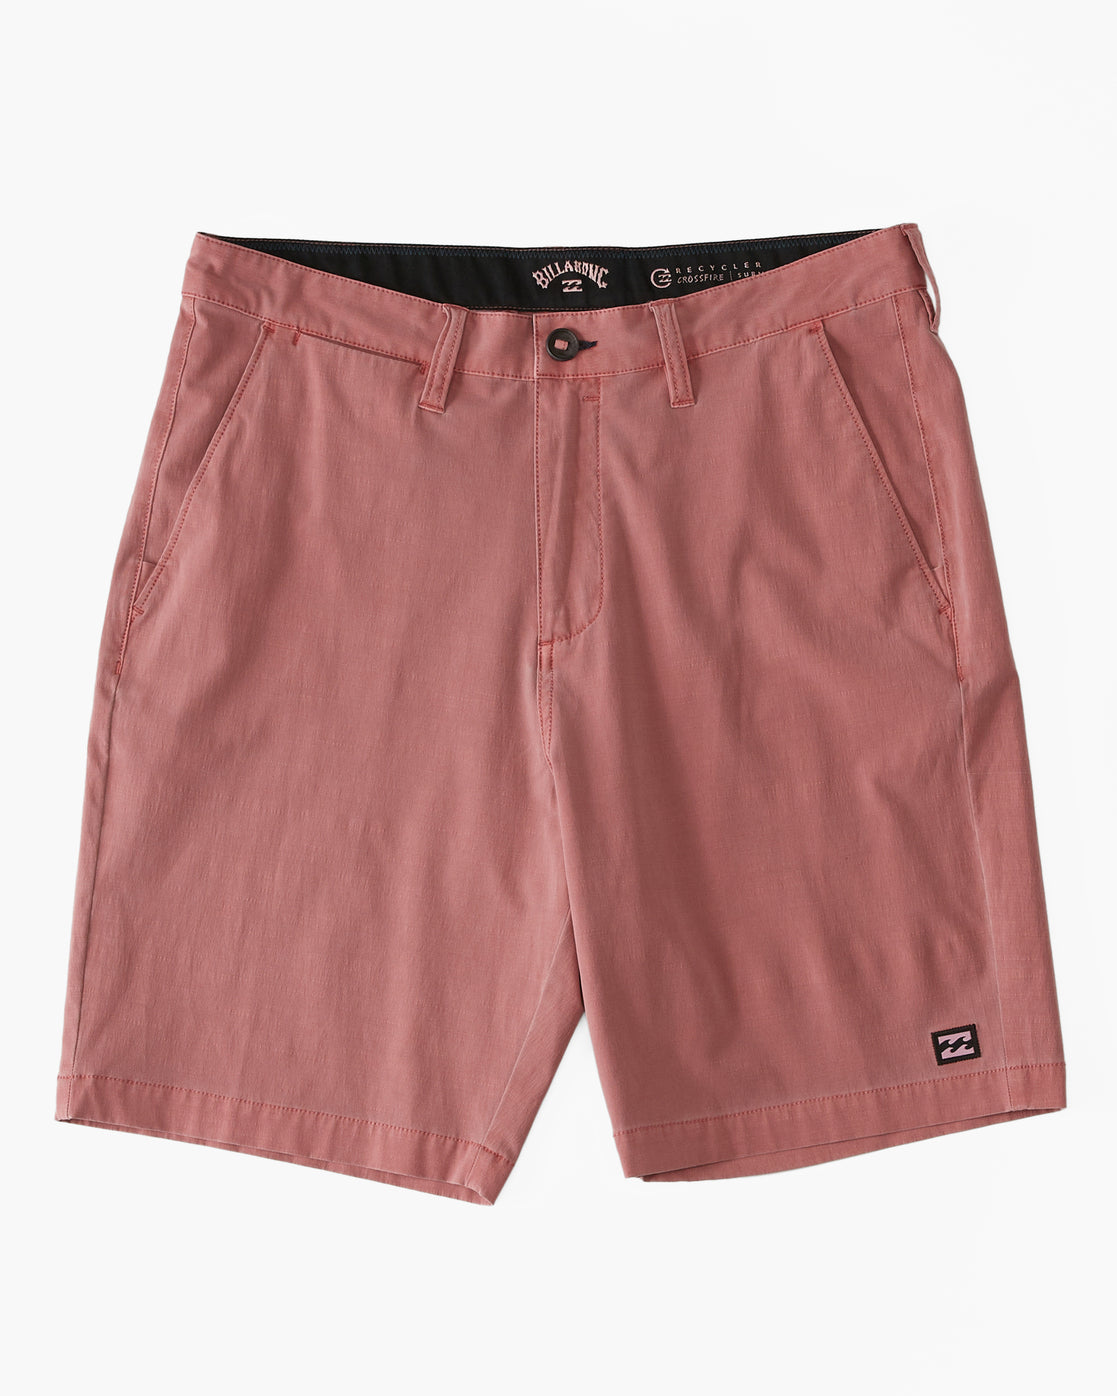 Crossfire Wave Washed 18" Hybrid Submersible Shorts - Coral